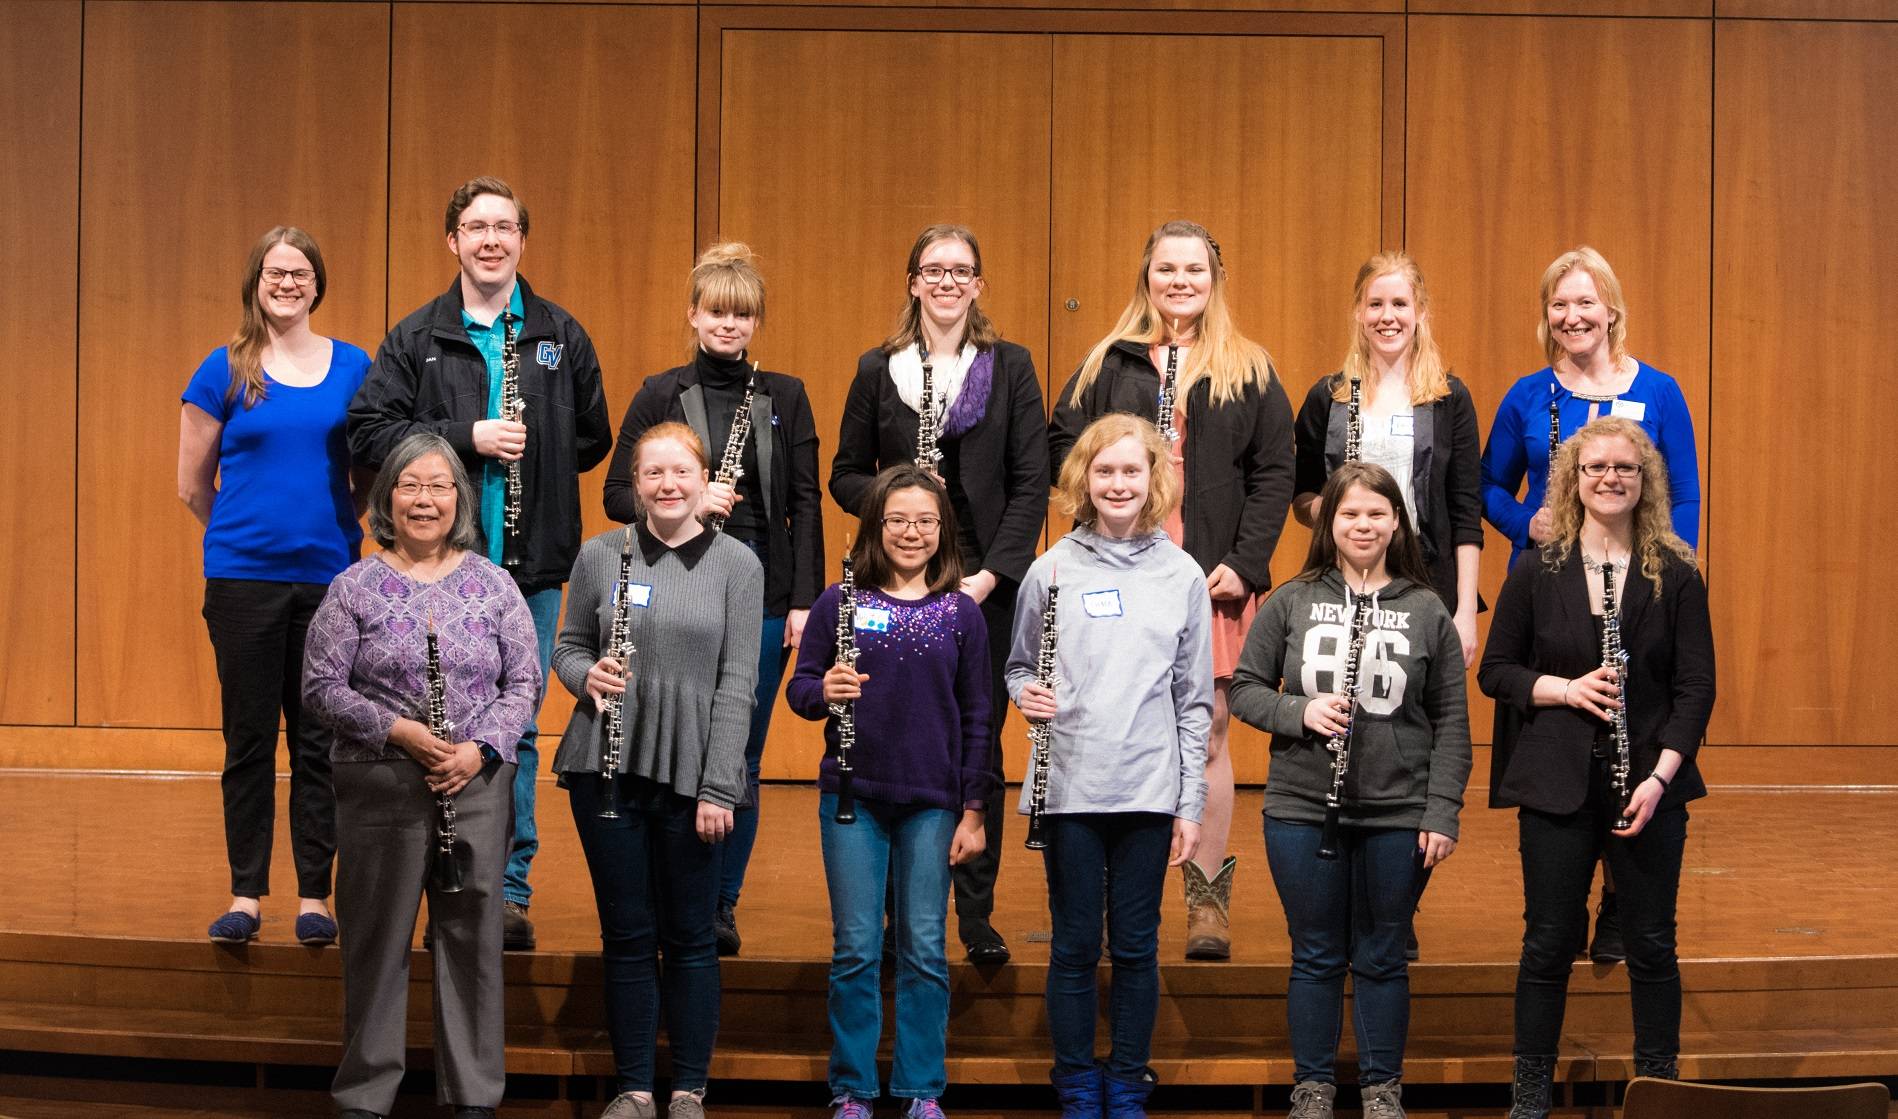 Group photo of 13 Oboe Day 2019 participants